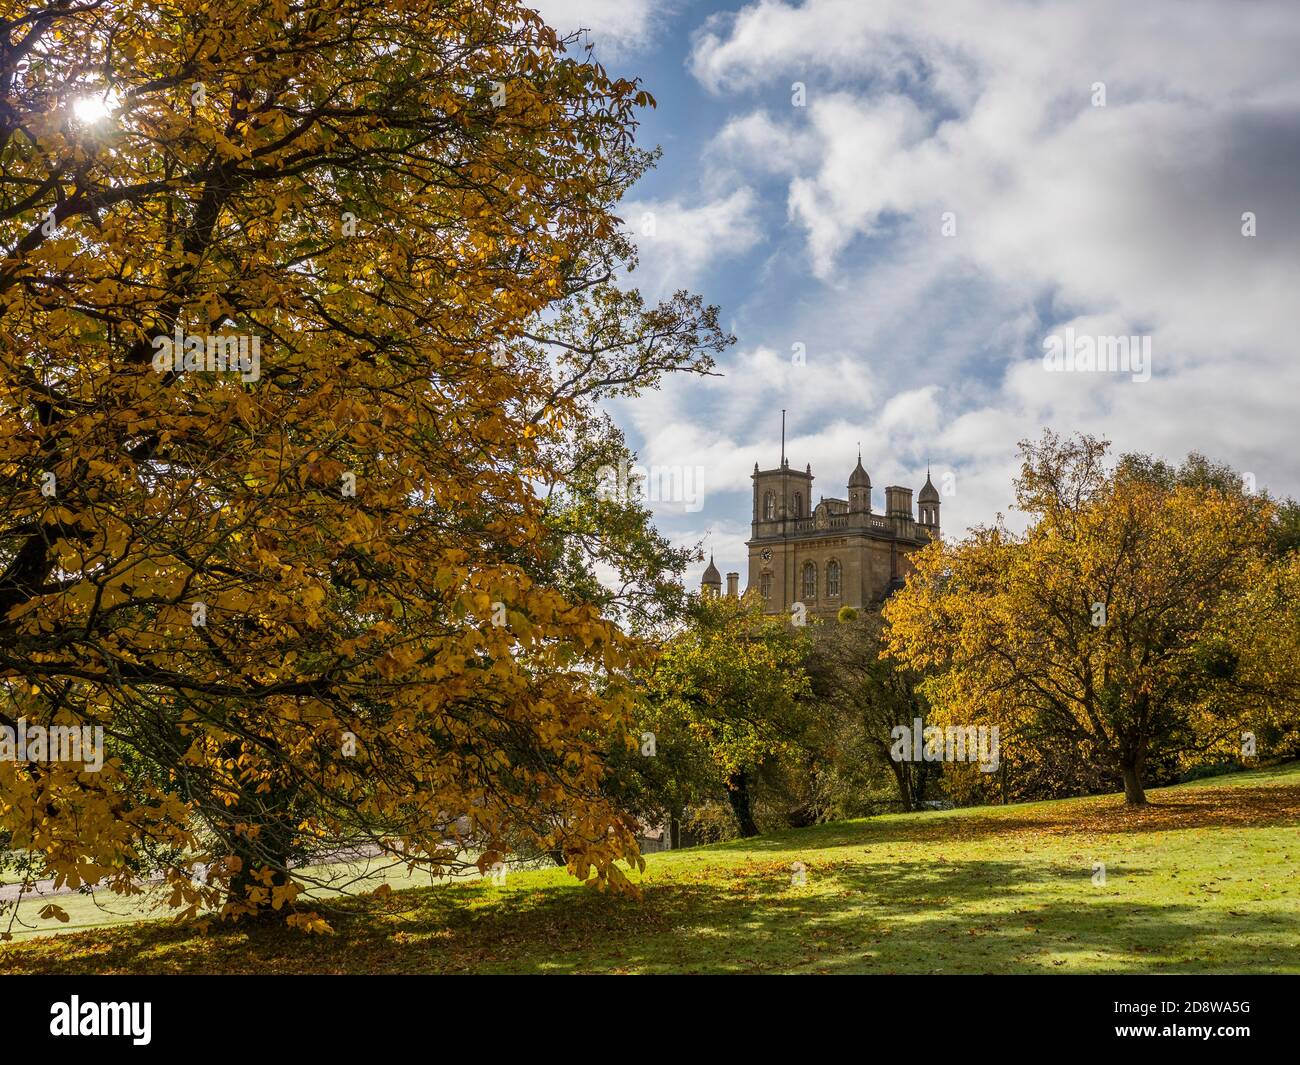 Autunno Landscape, Elizabethan Country House, Englefield House, Englefield Estate, Englefield, Thale, Reading, Berkshire, UK, GB. Foto Stock